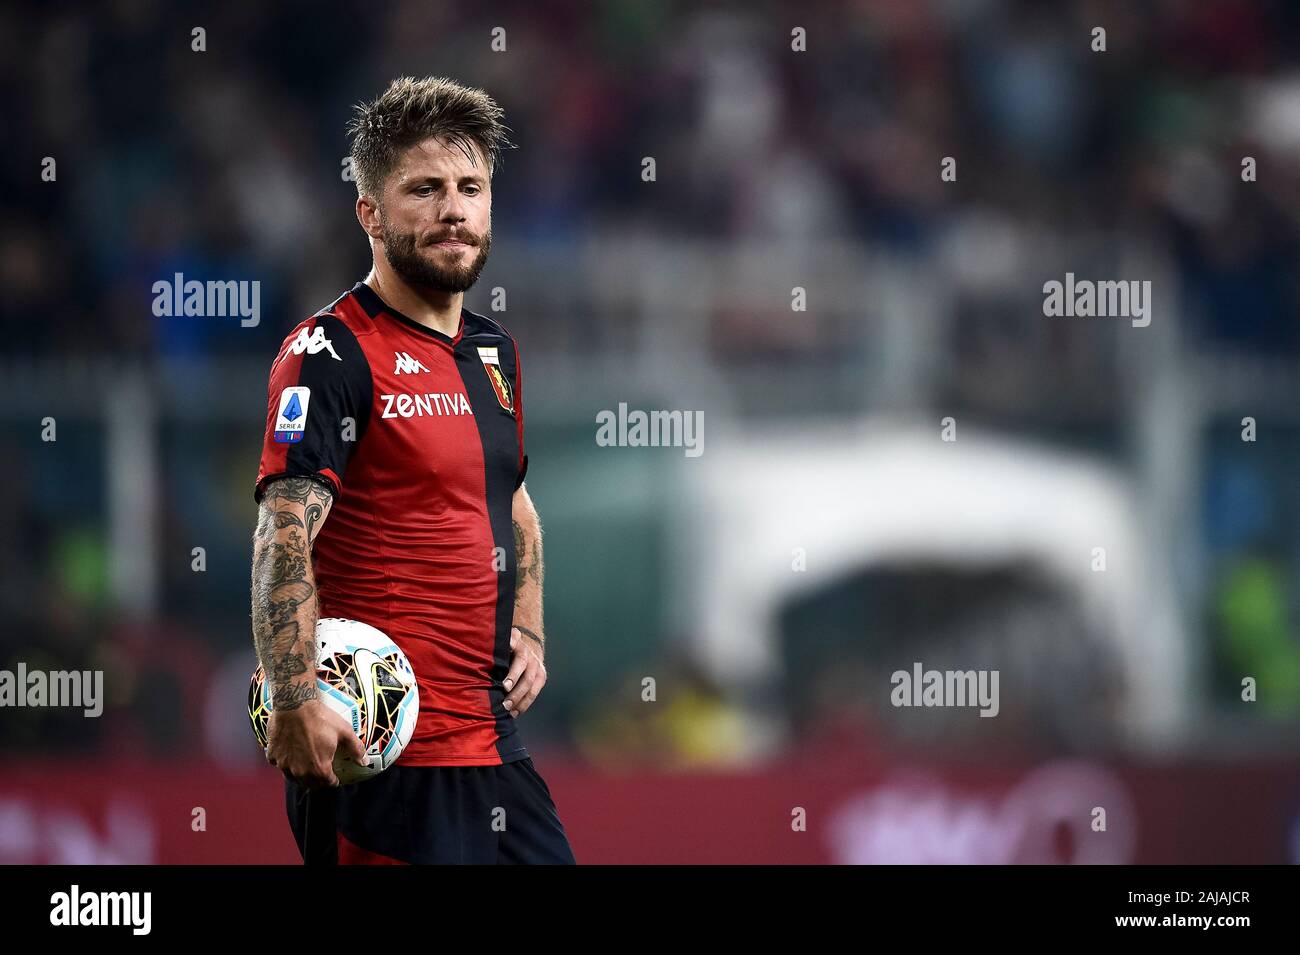 Genoa, Italy. 5 October, 2019: Lasse Schone of Genoa CFC holds the ball  during the Serie A football match between Genoa CFC and AC Milan. AC Milan  won 2-1 over Genoa CFC.